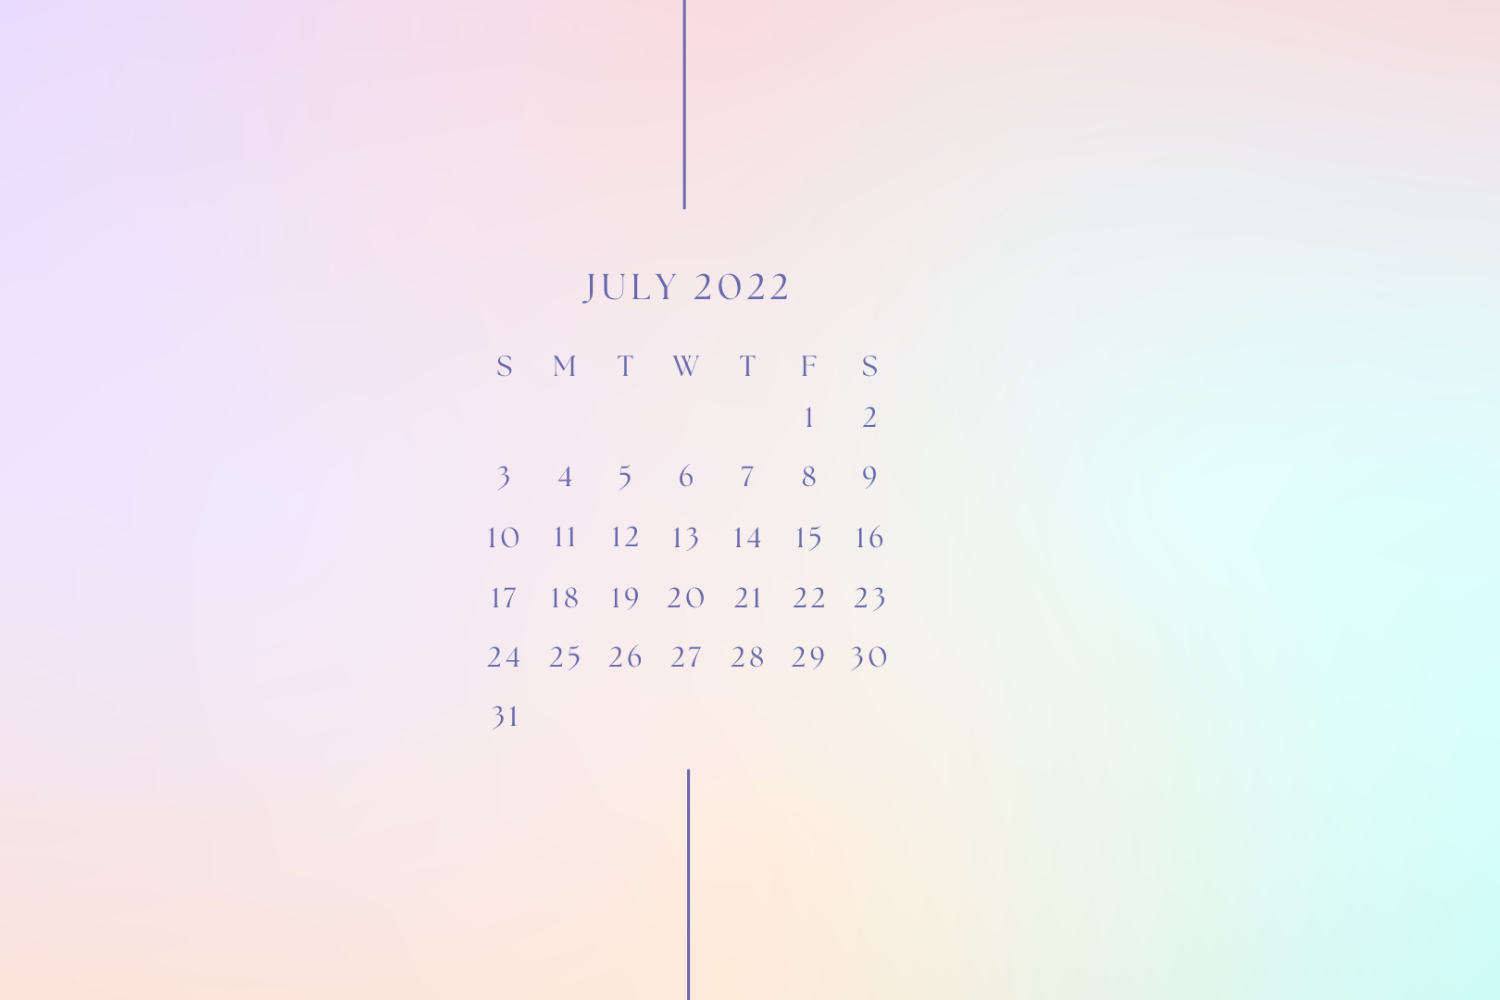 Simple calendar on colorful blurry background.